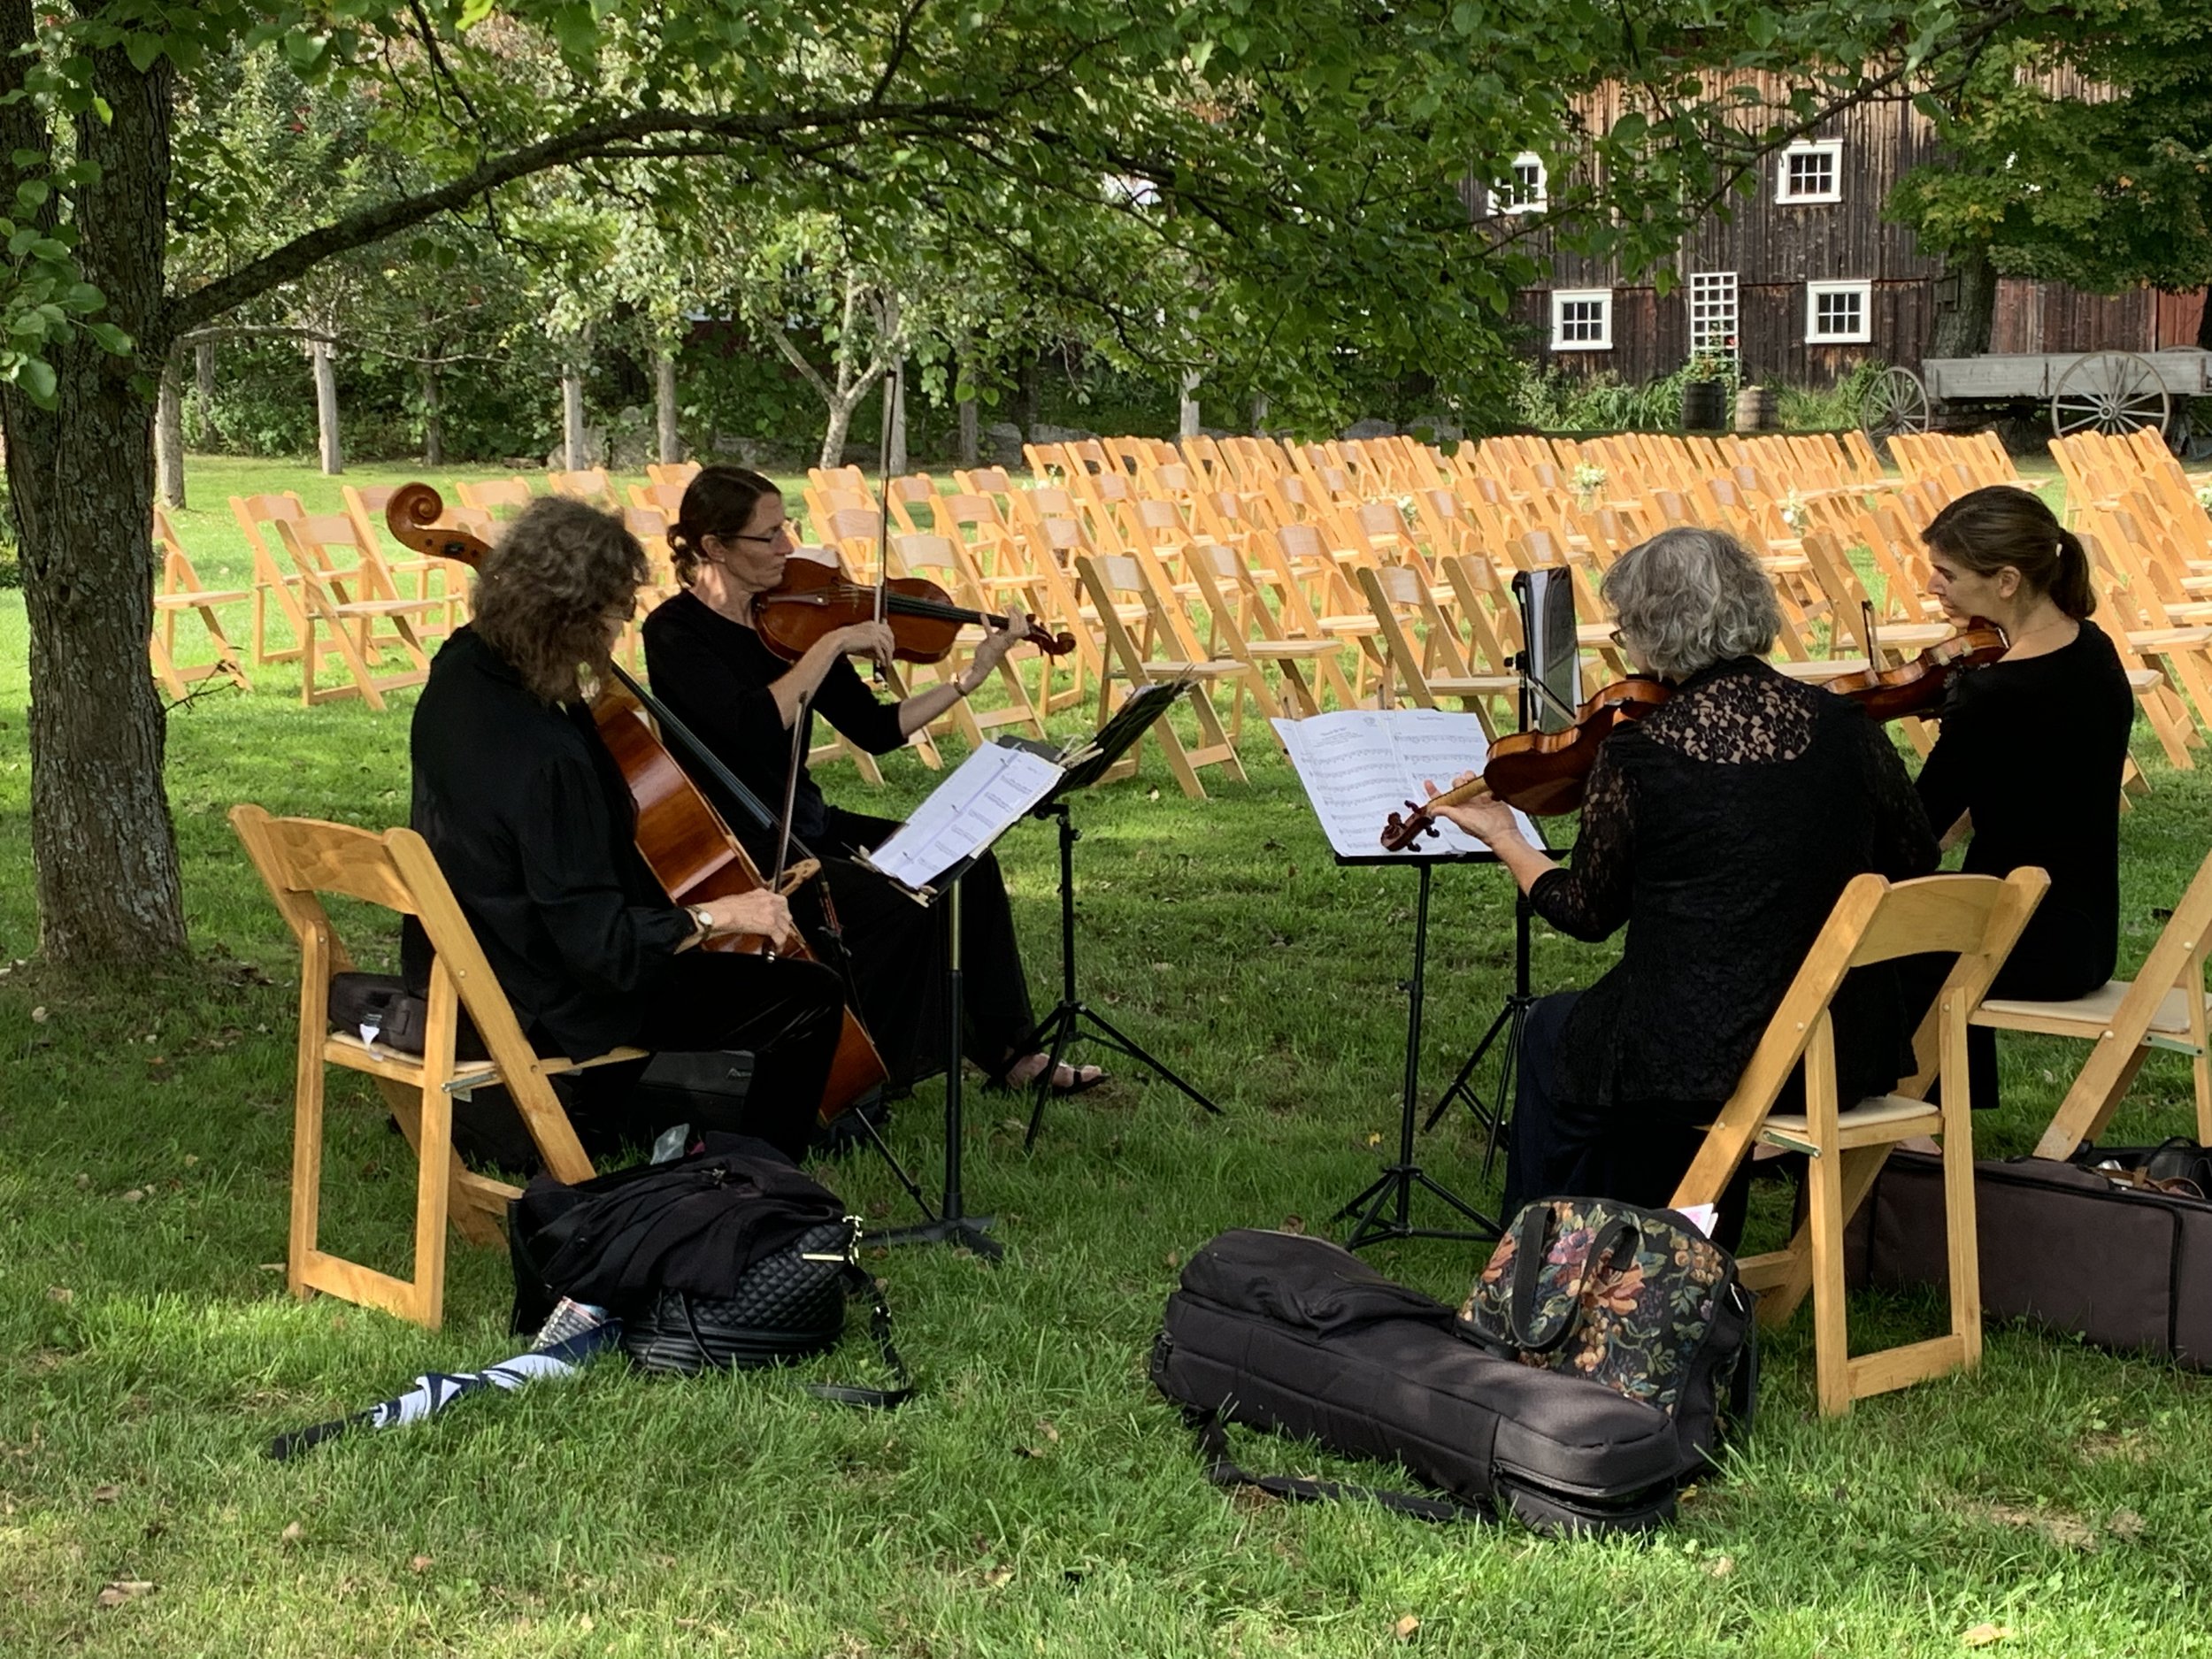 A strings quartet playing under the trees next to empty chairs outside of a barn